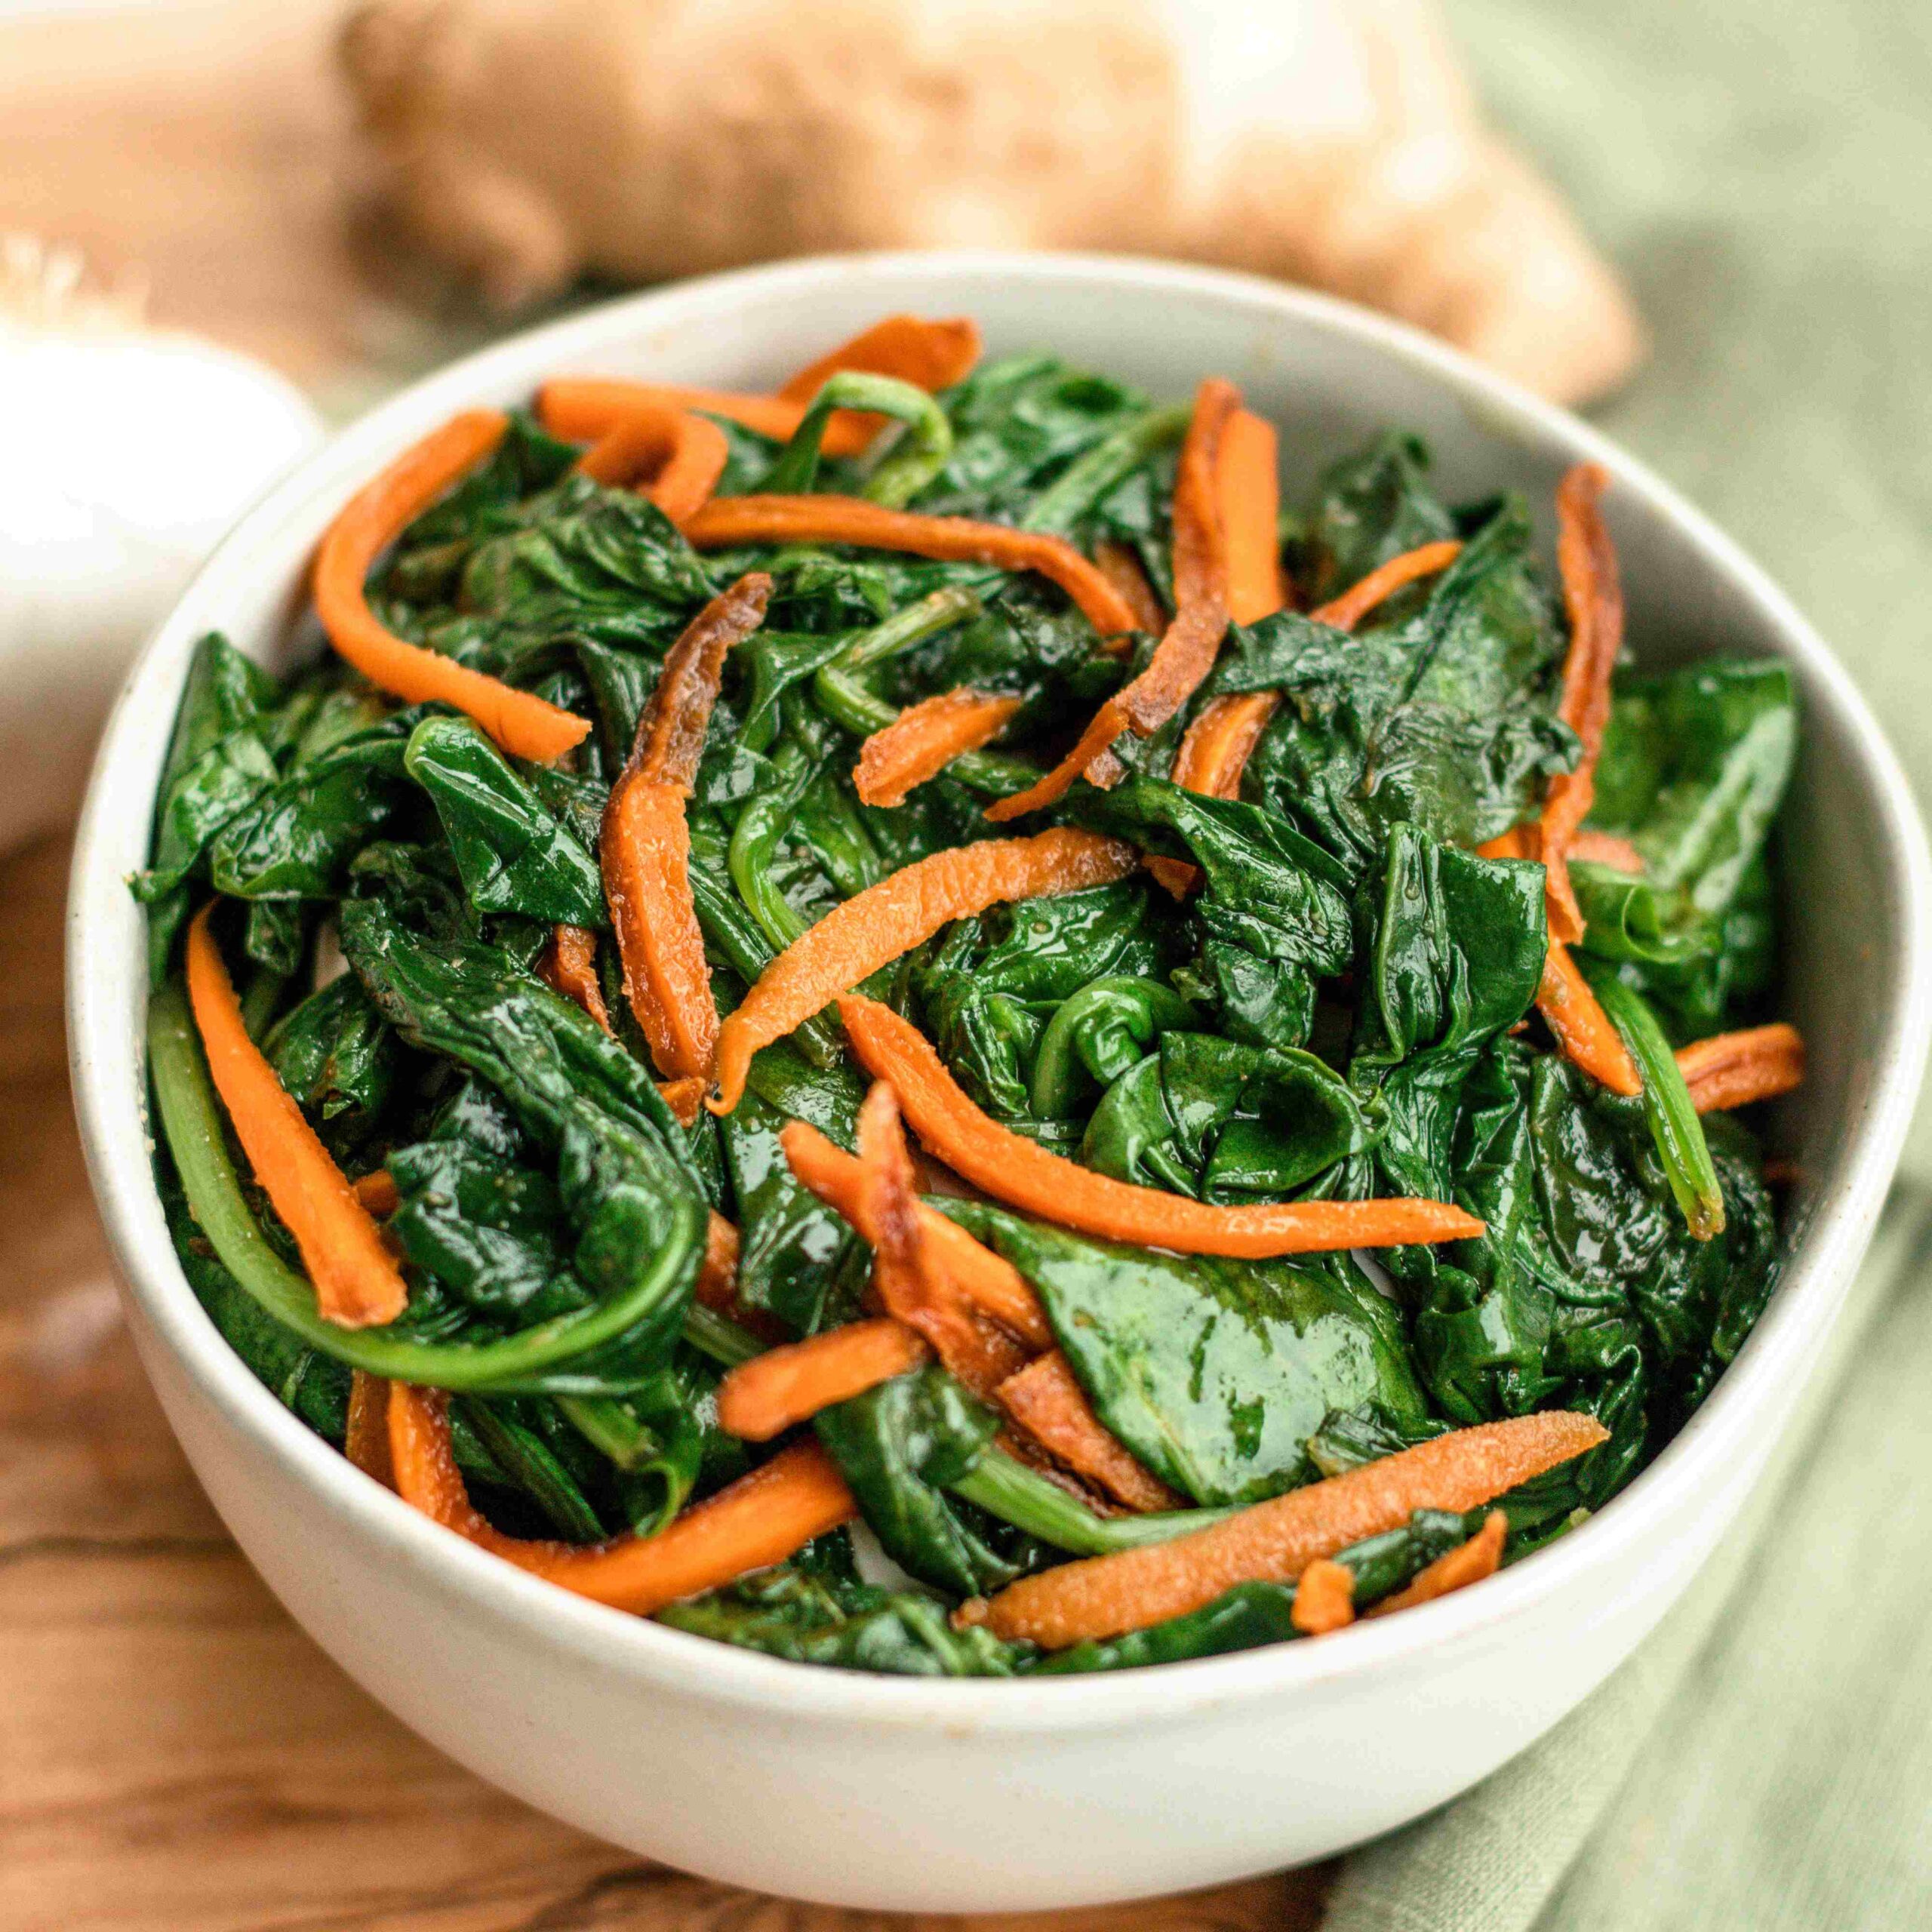 Image of Carrots and spinach